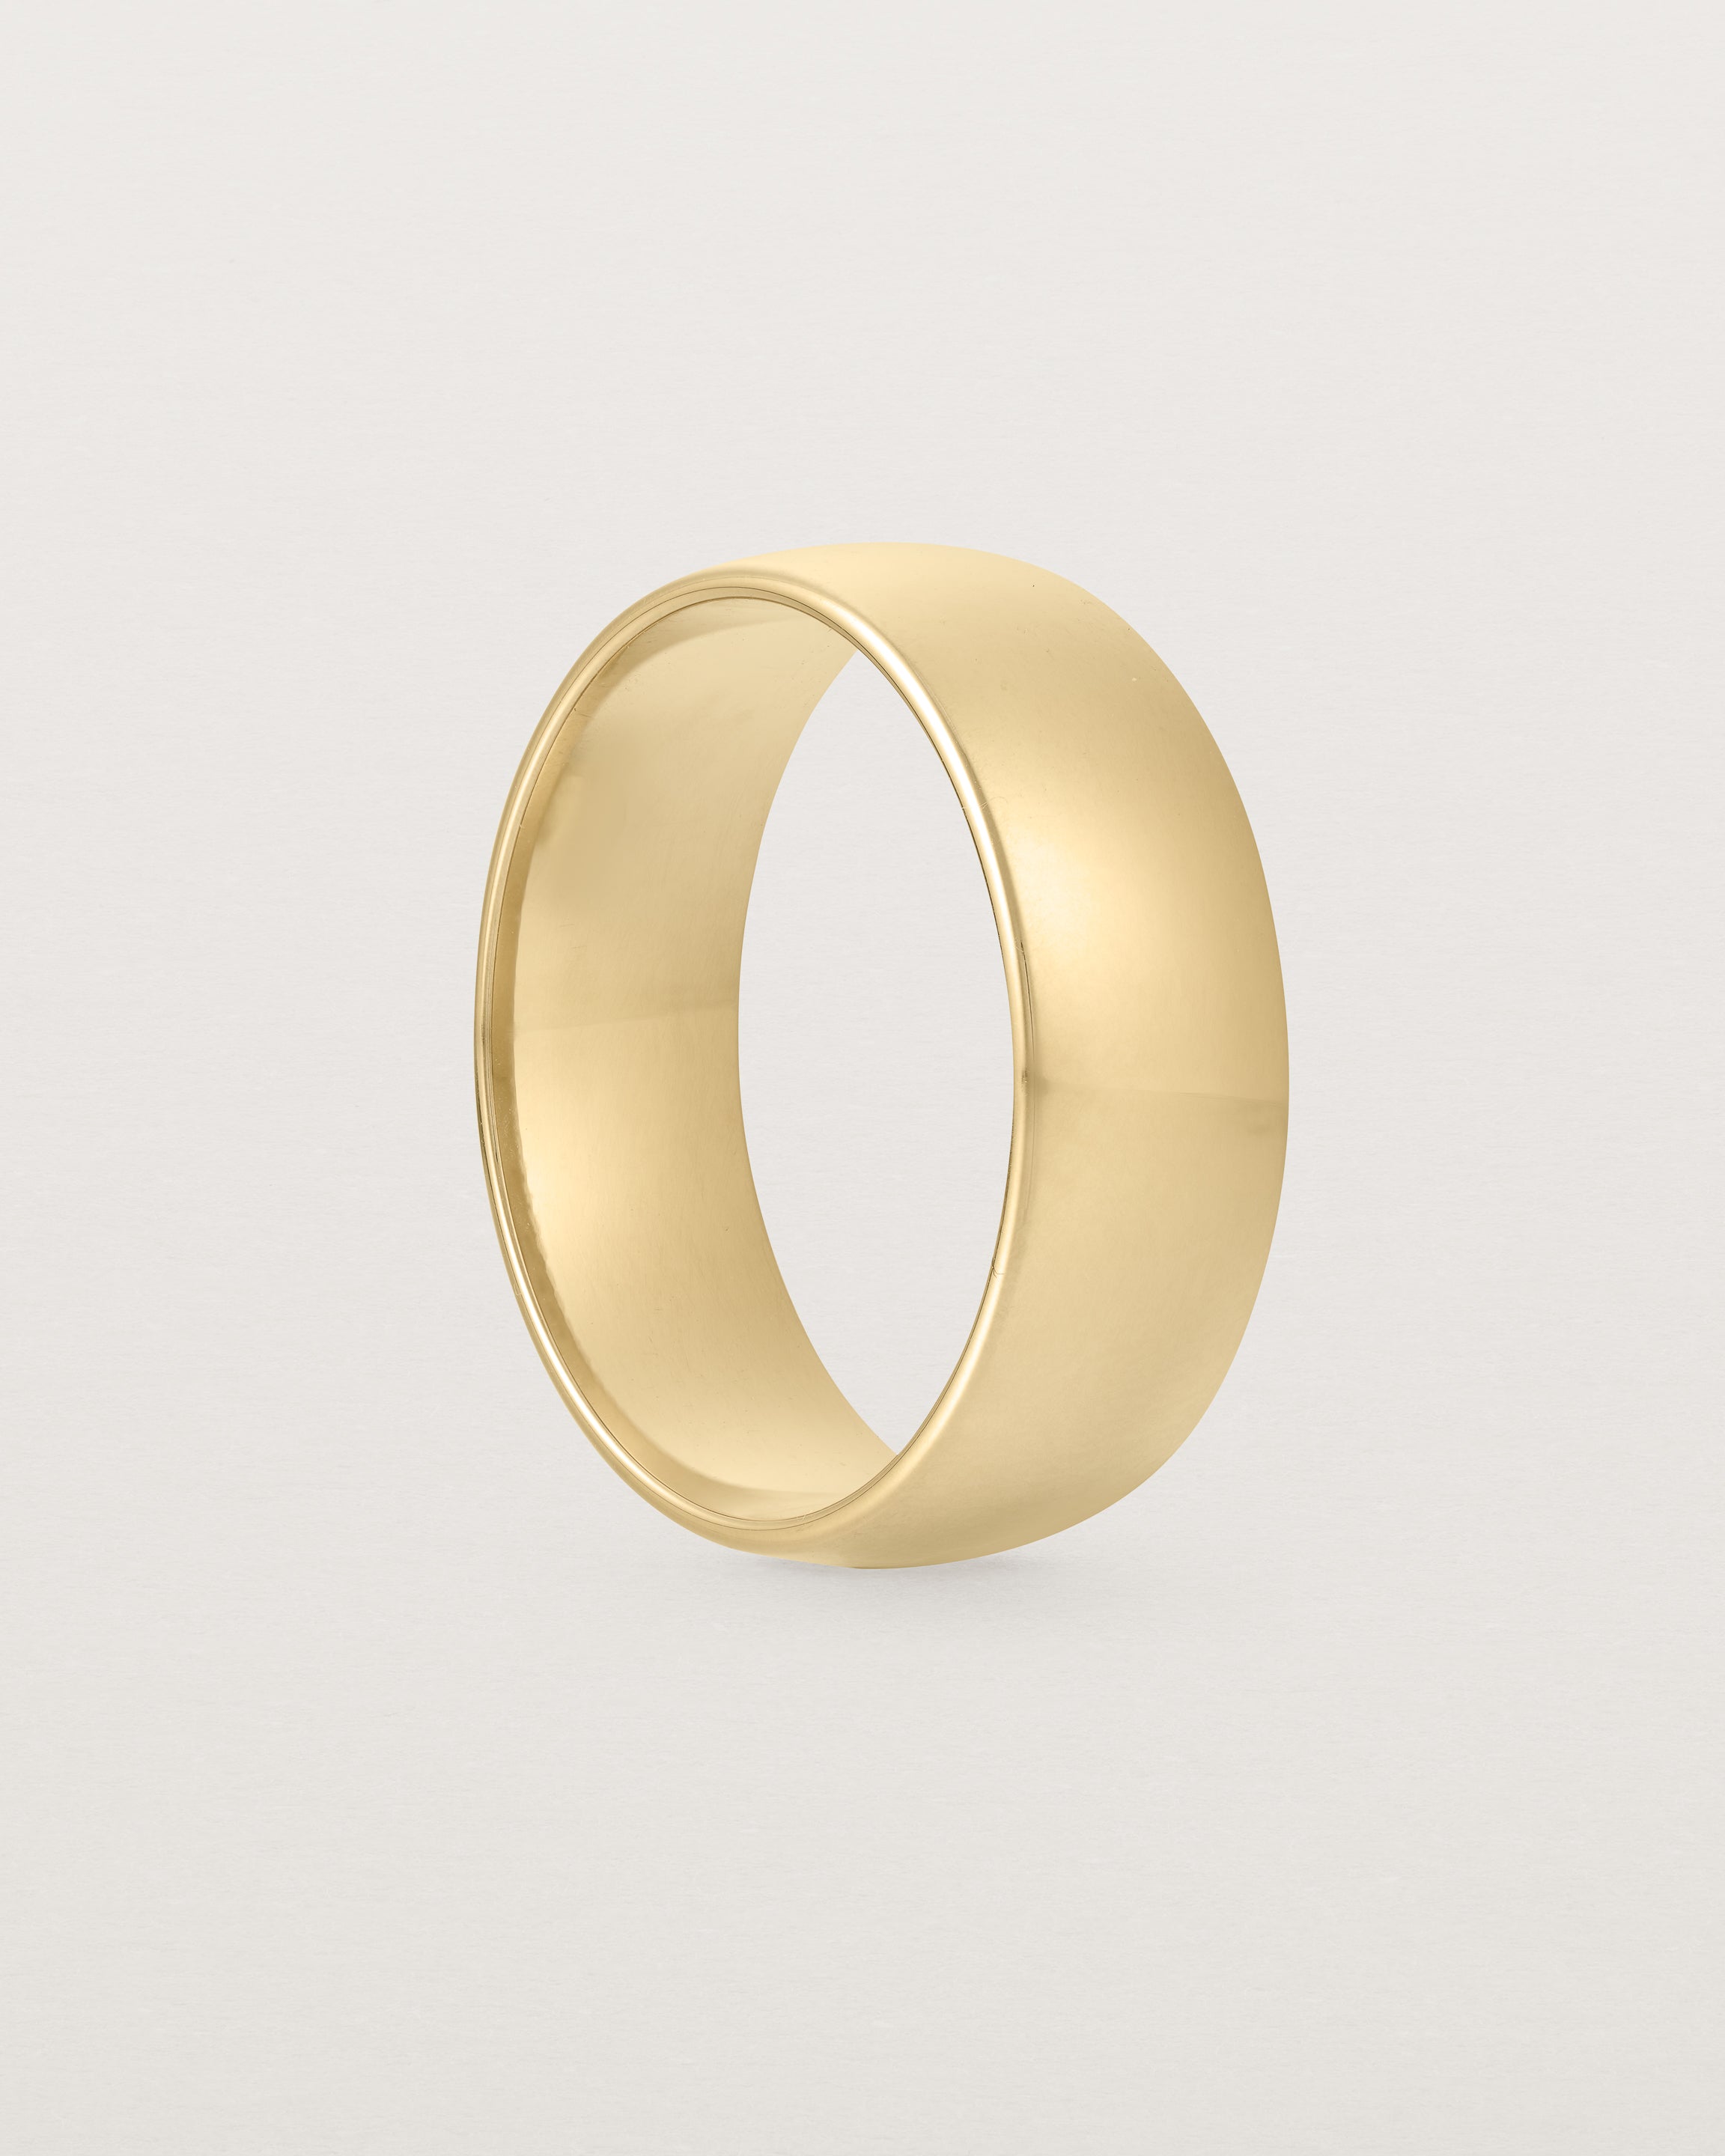 The side view of a heavy 7mm wedding band in yellow gold